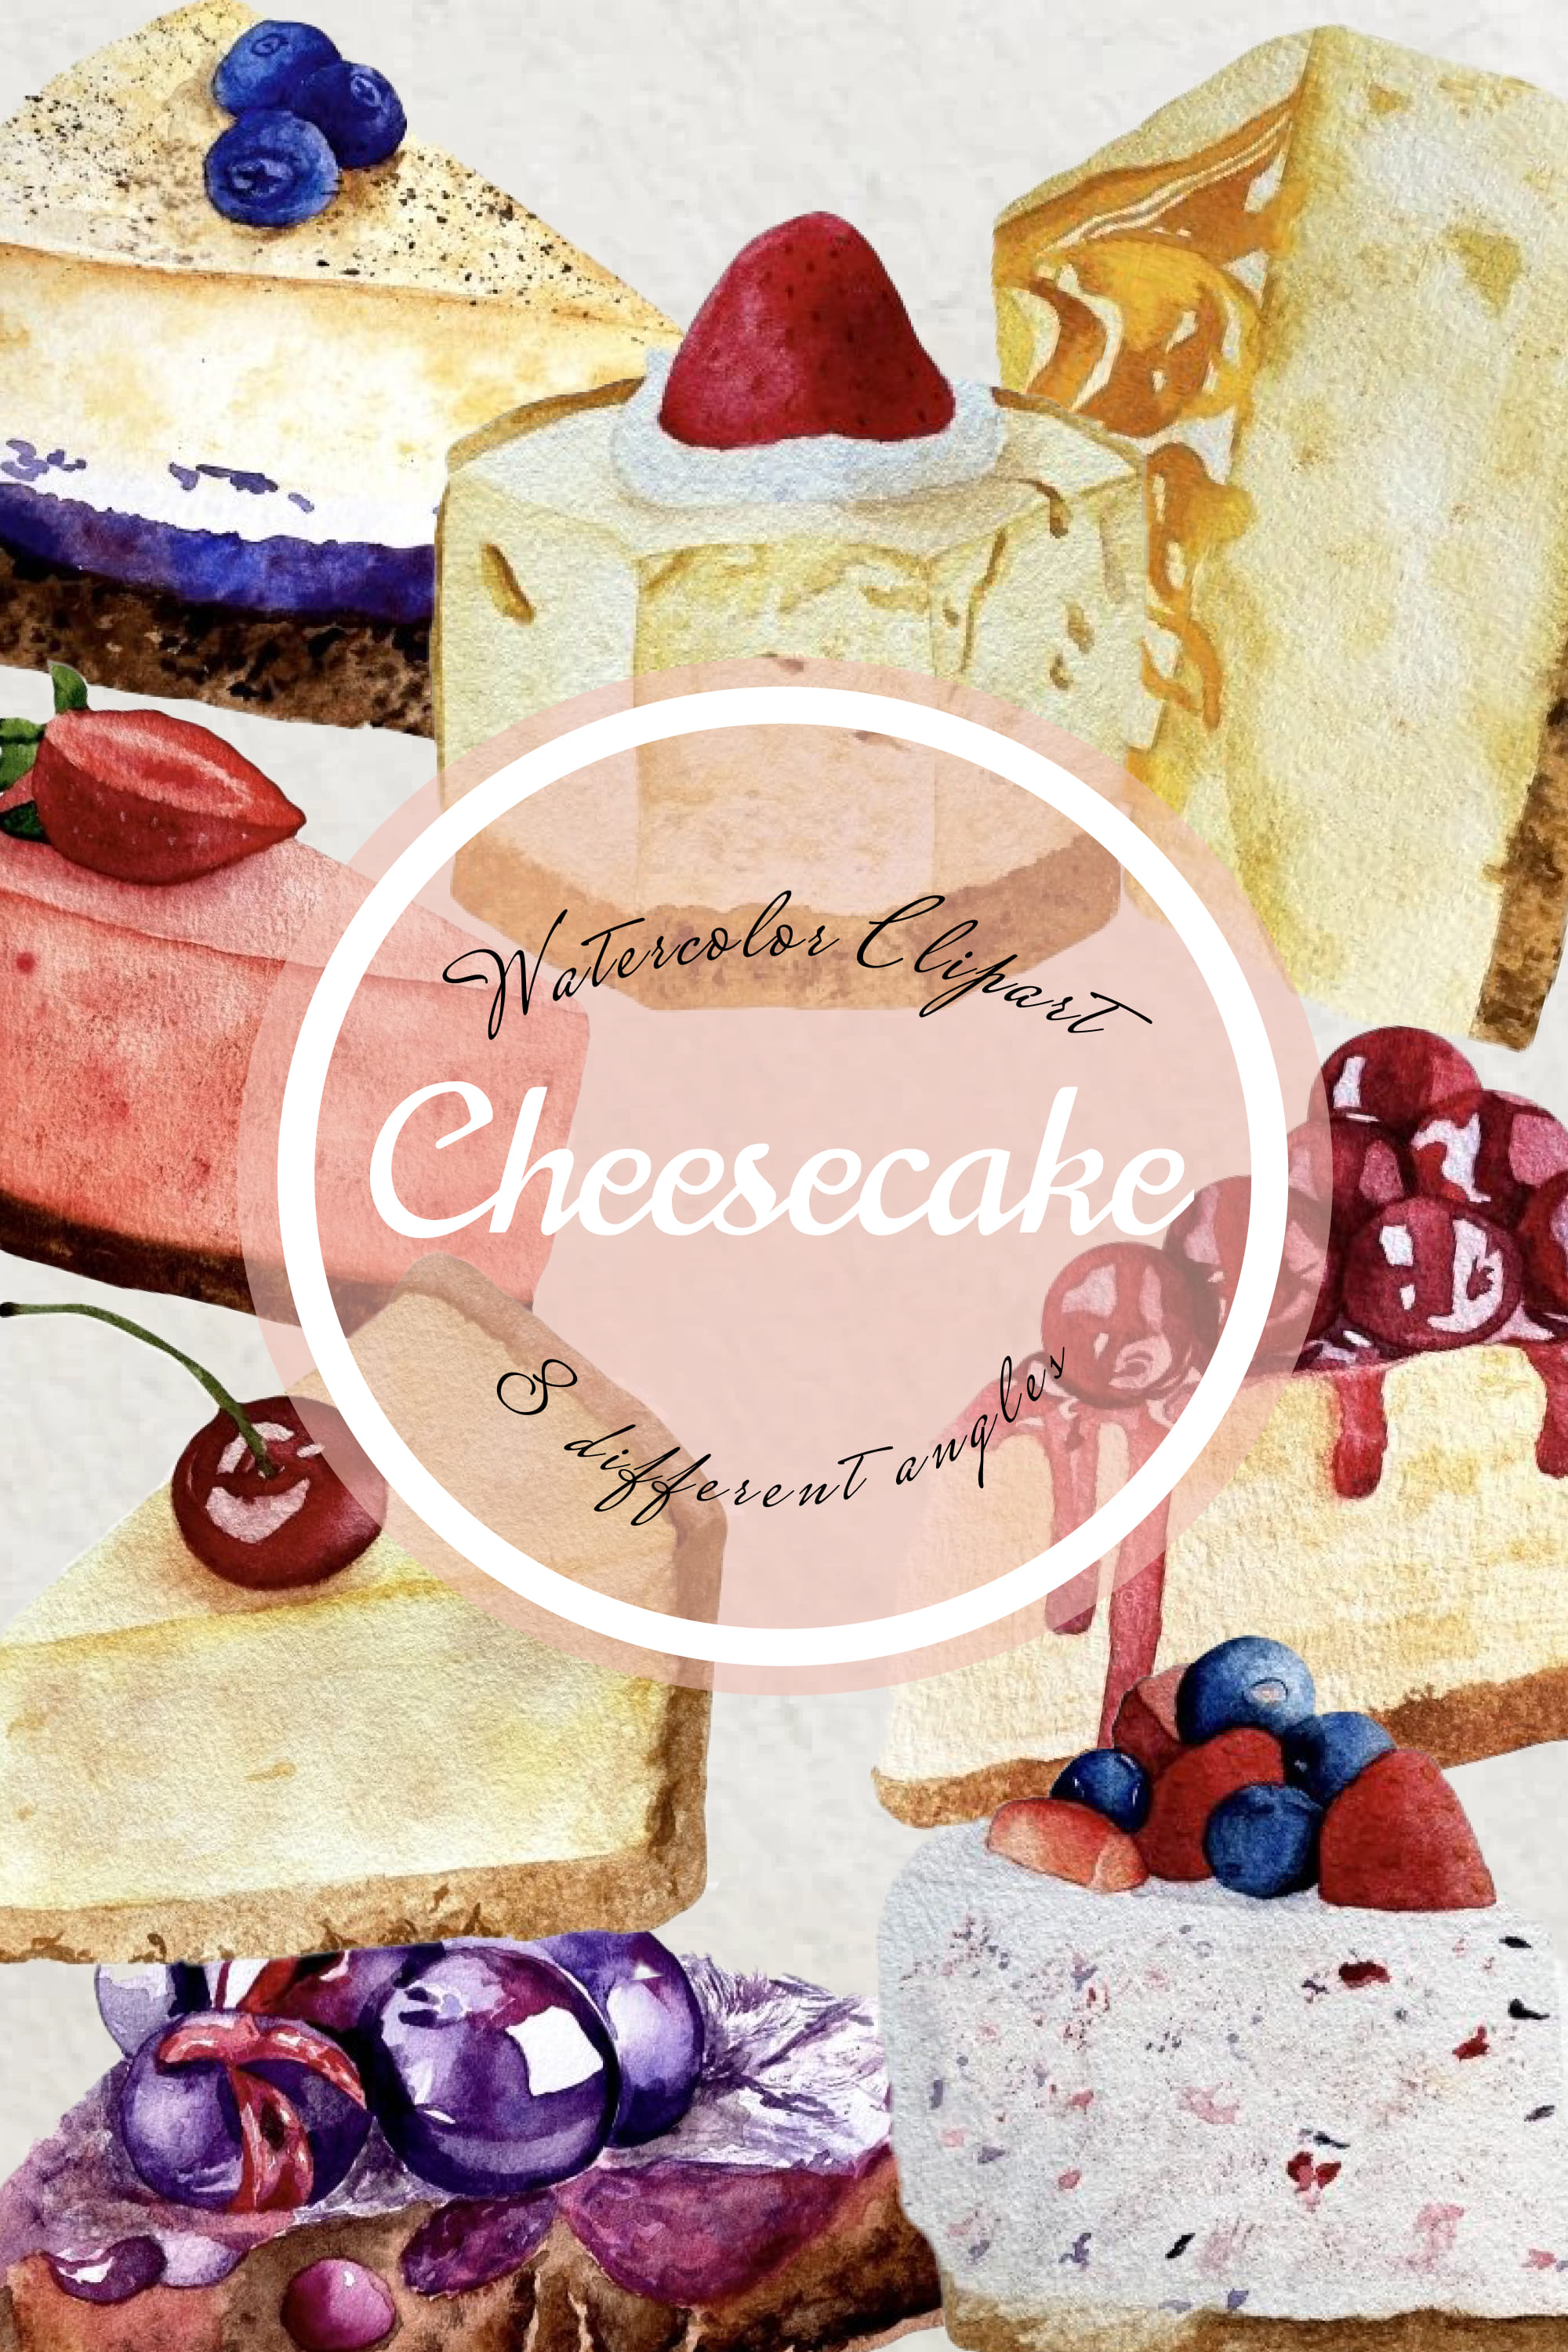 Collection of colorful images of cheesecakes.